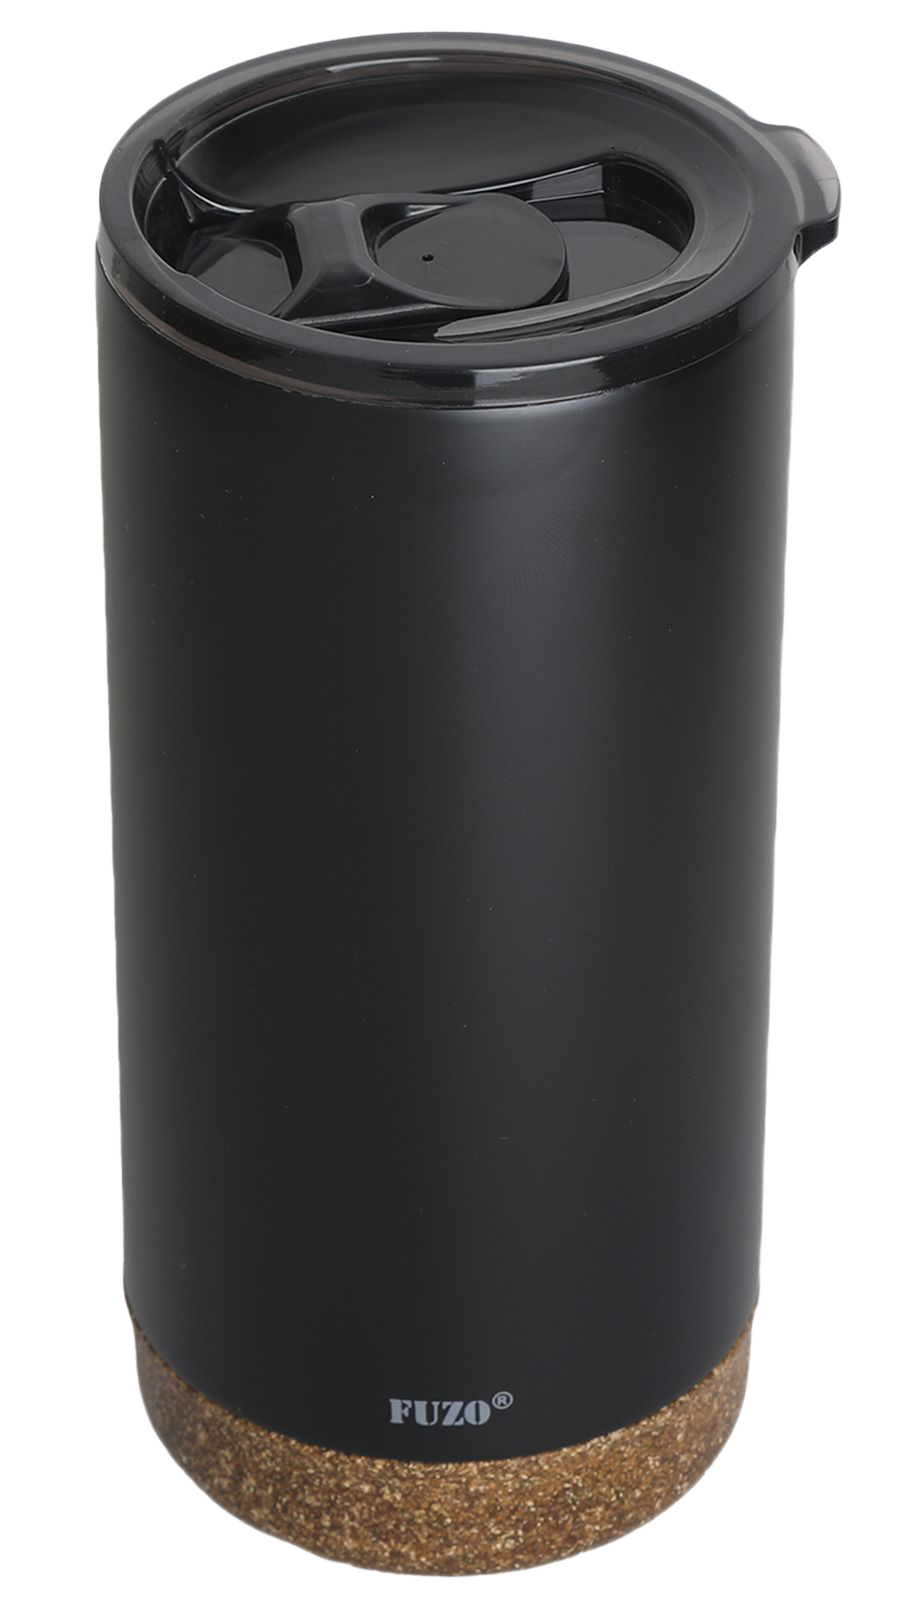 Double Wall Stainless Steel Mug with Cork Base (Black)